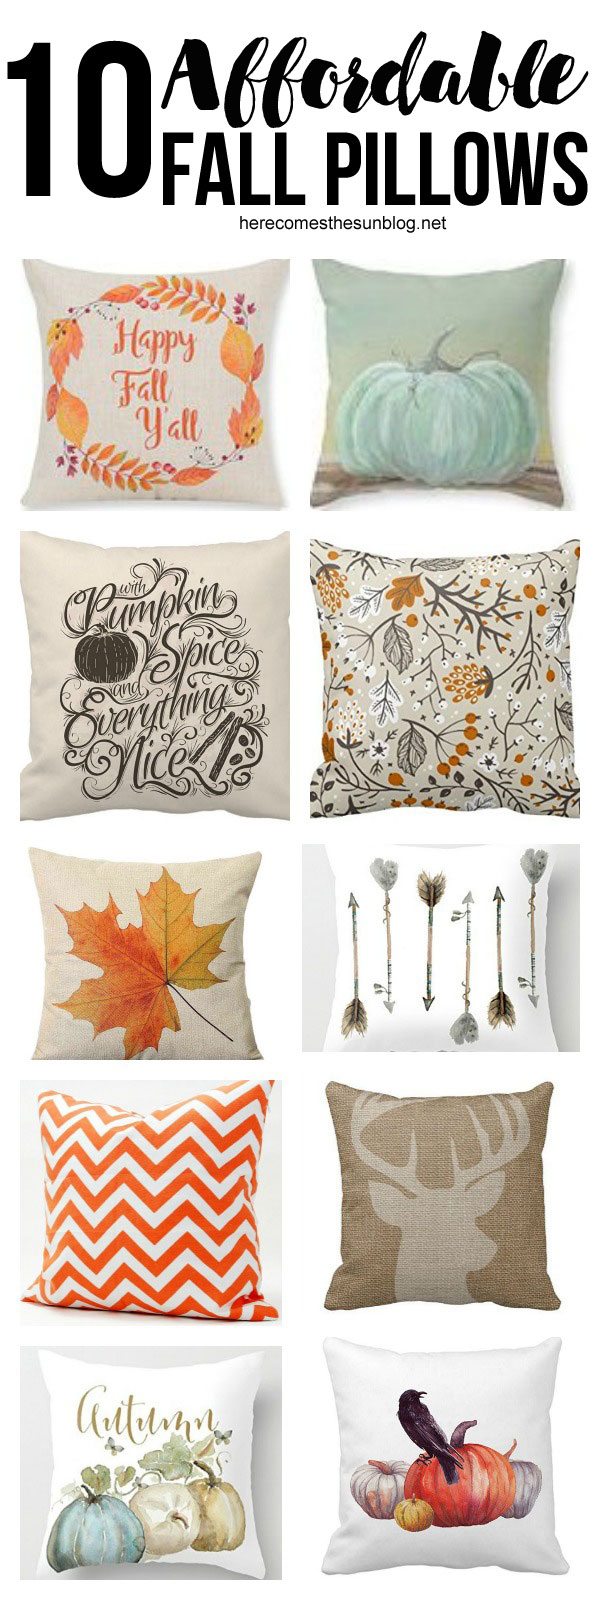 All of these beautiful Fall pillows are under $15! An amazing list of pillow decor from Here Comes the Sun